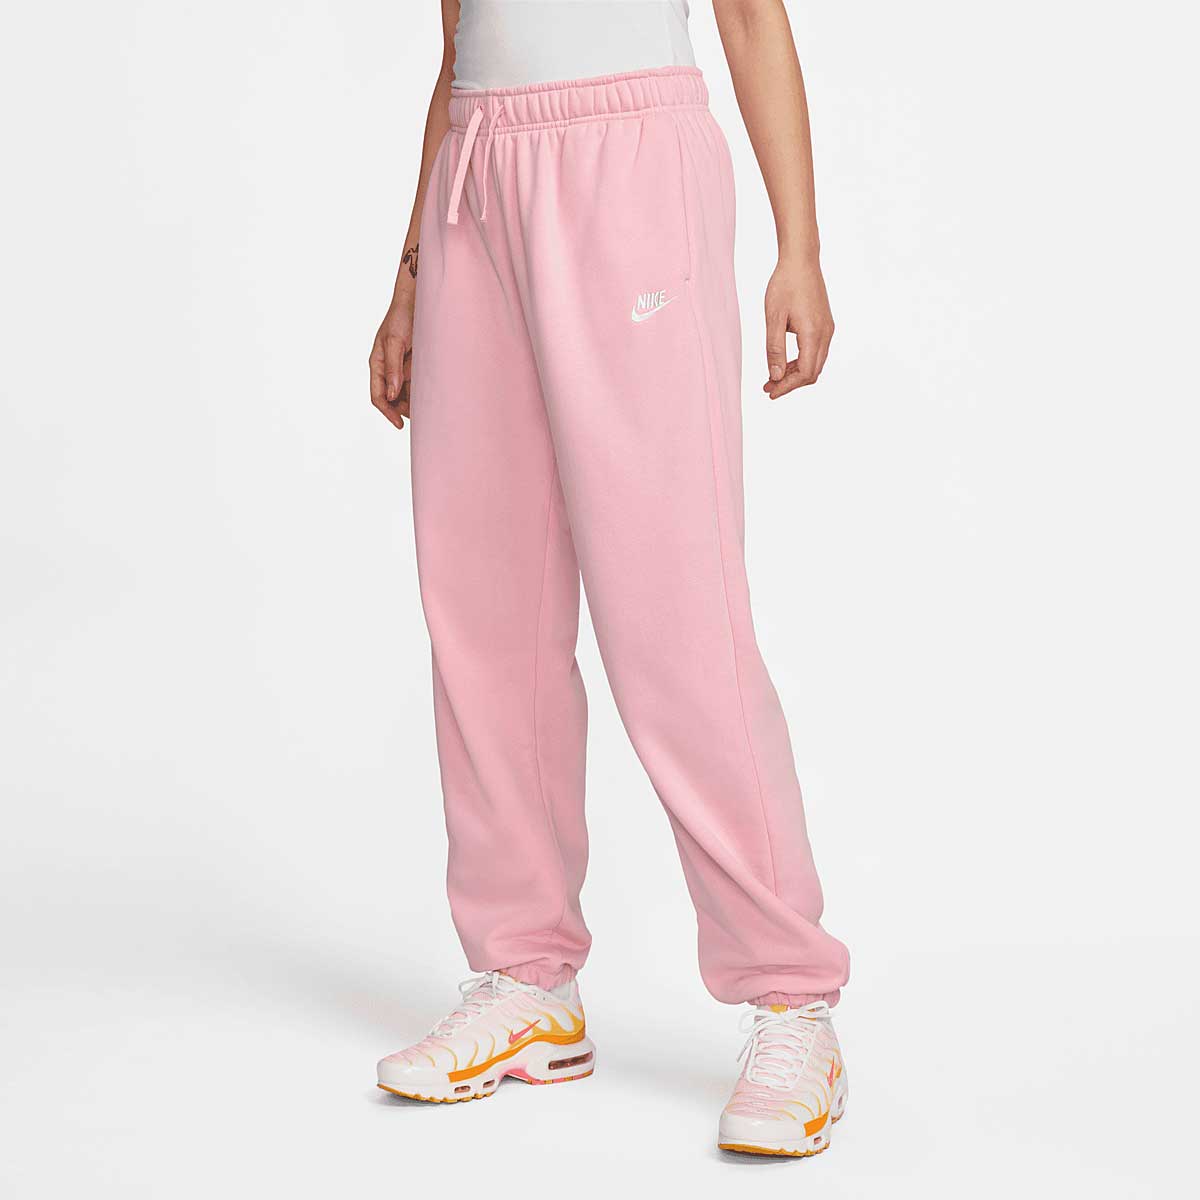 Nike Nsw Club Fleece Oversized Pant Womens, Med Soft Pink/White